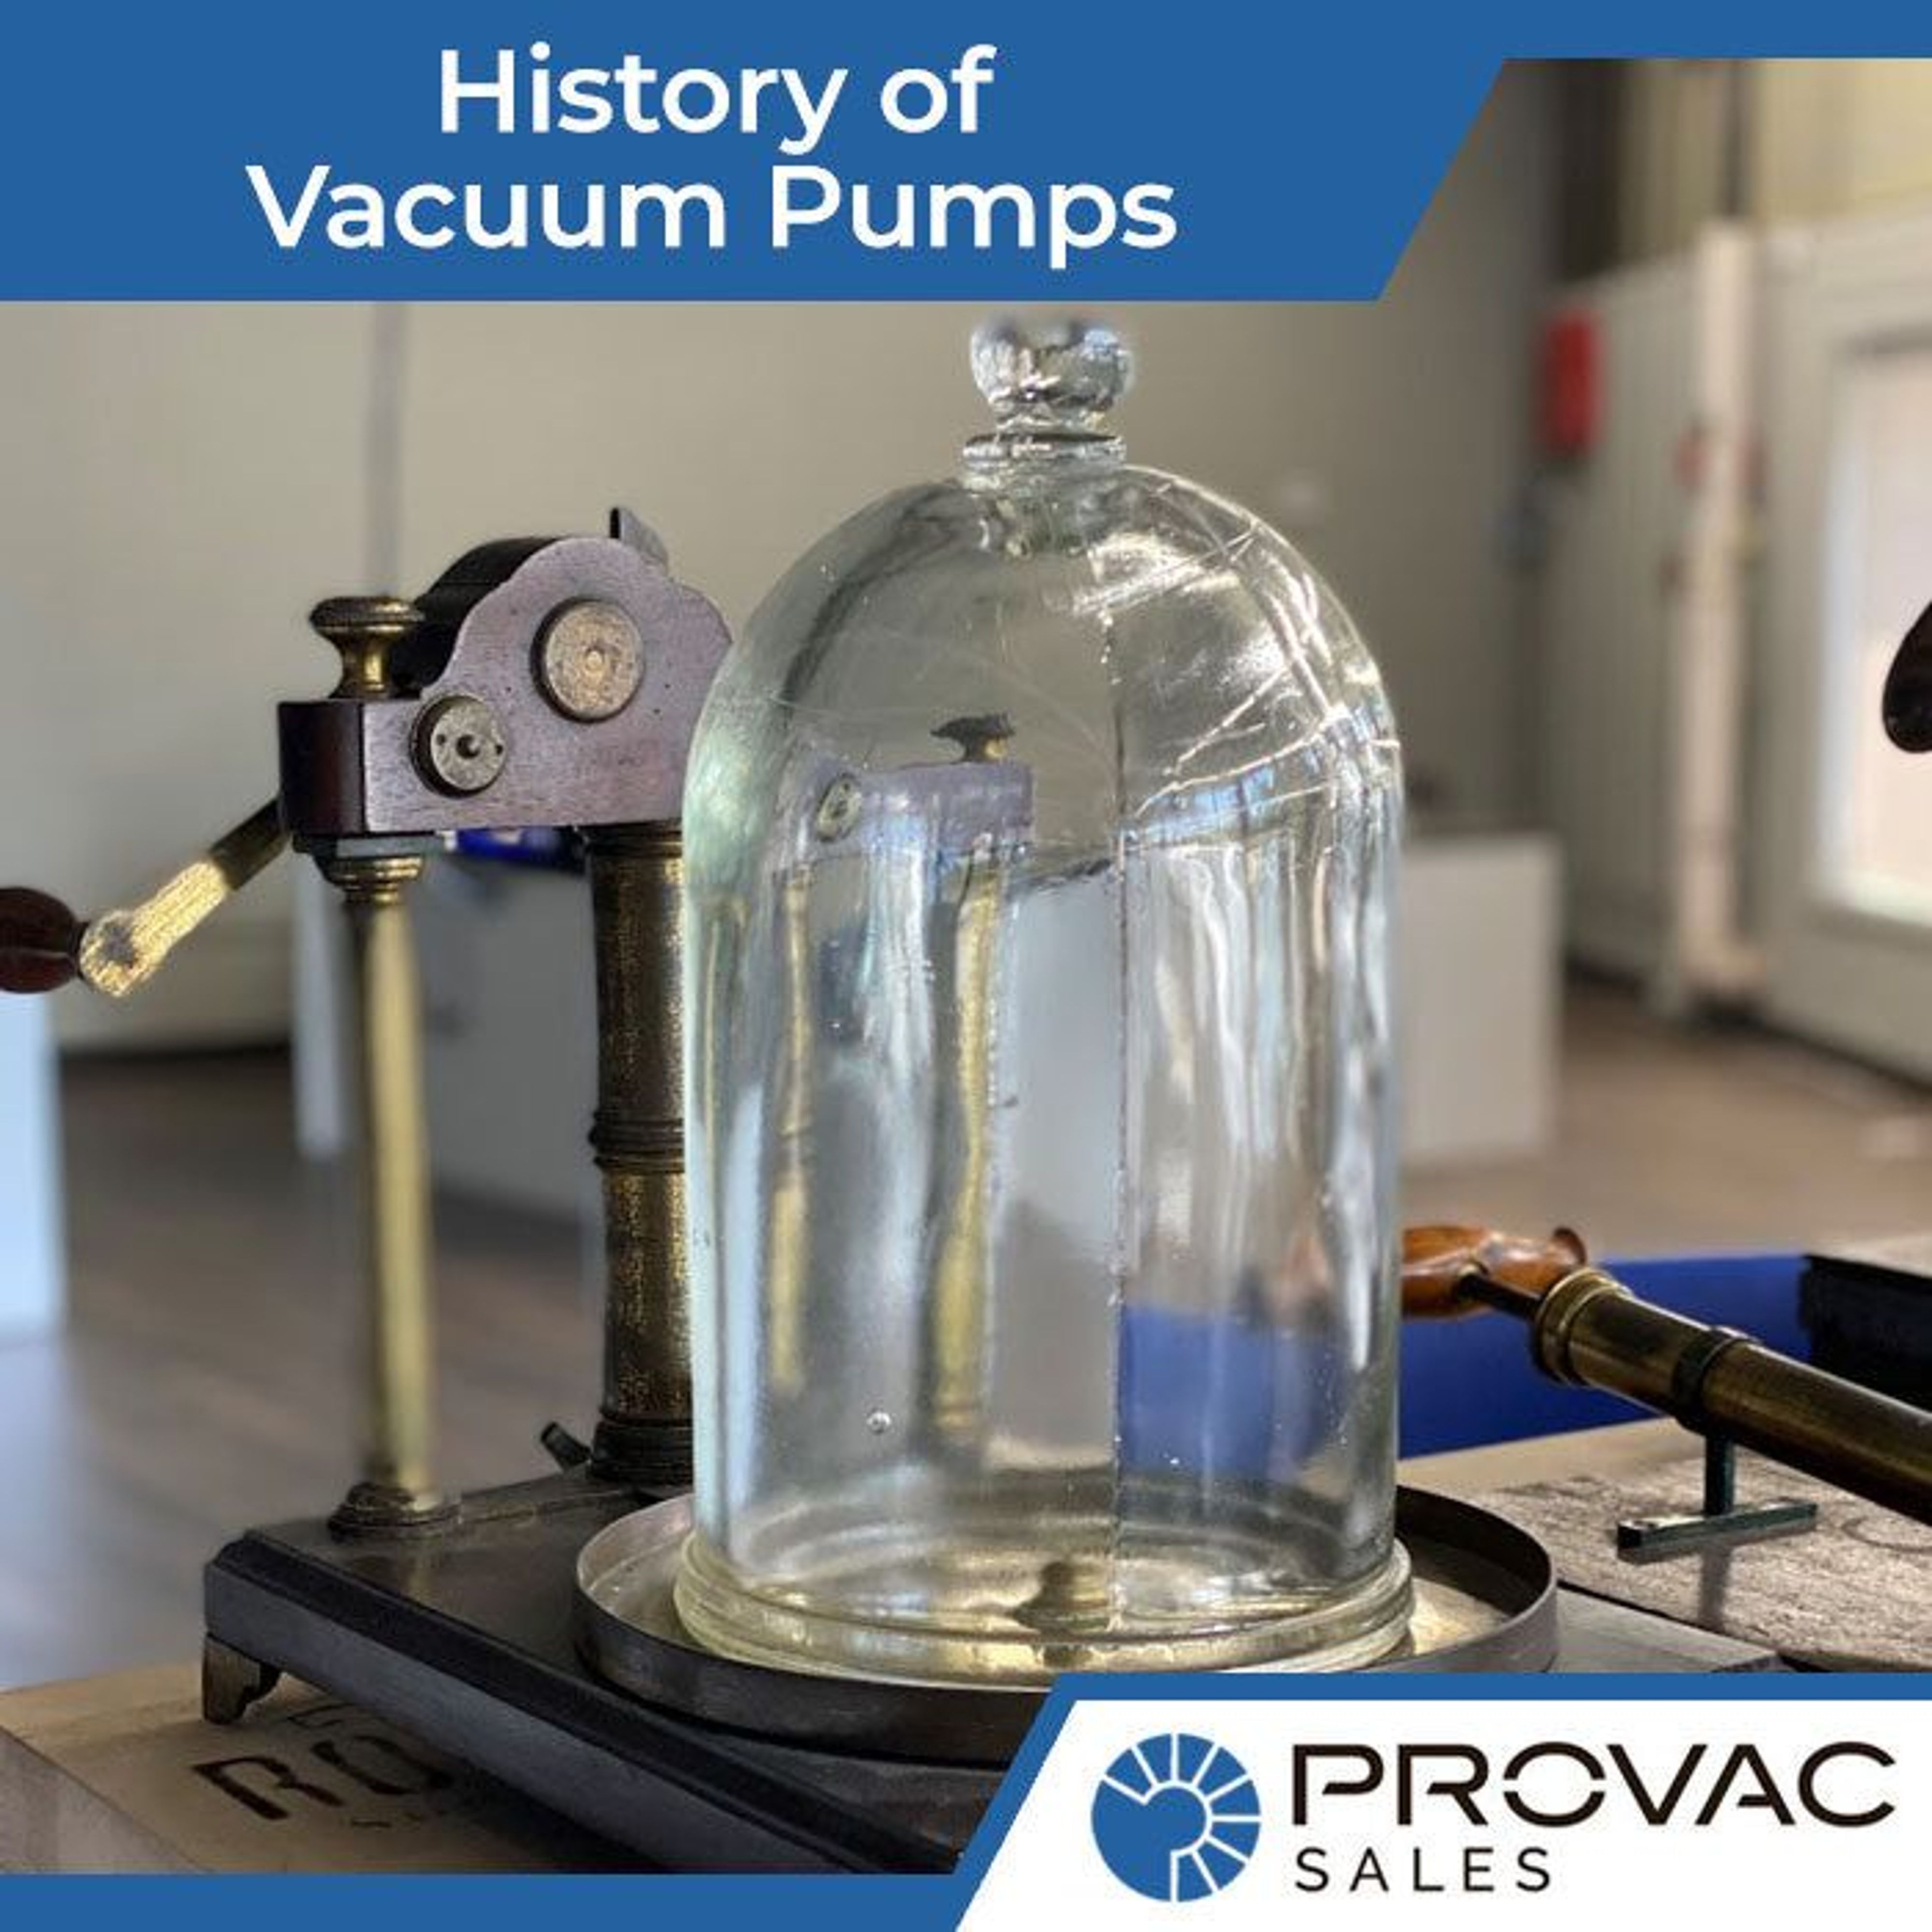 History of Vacuum Pumps Background